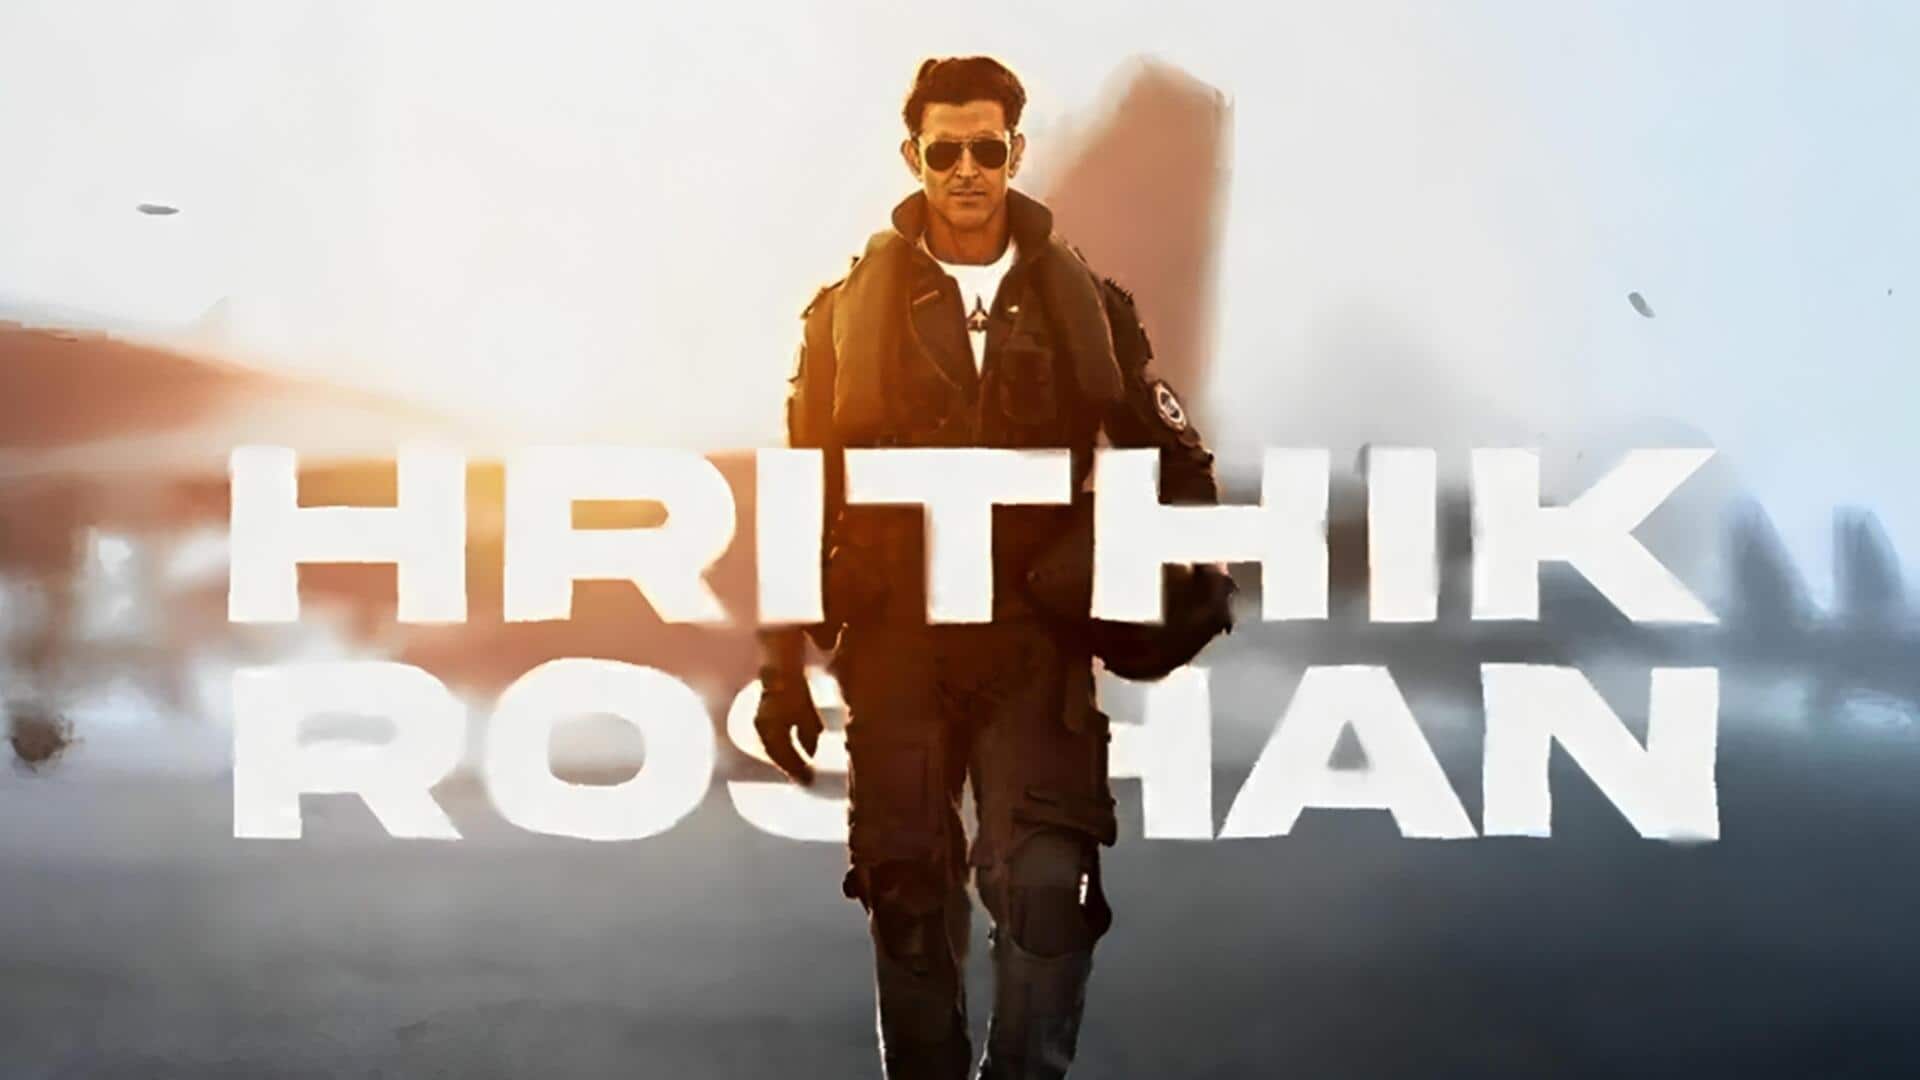 'Fighter': First look of Hrithik revealed; film getting 3D release